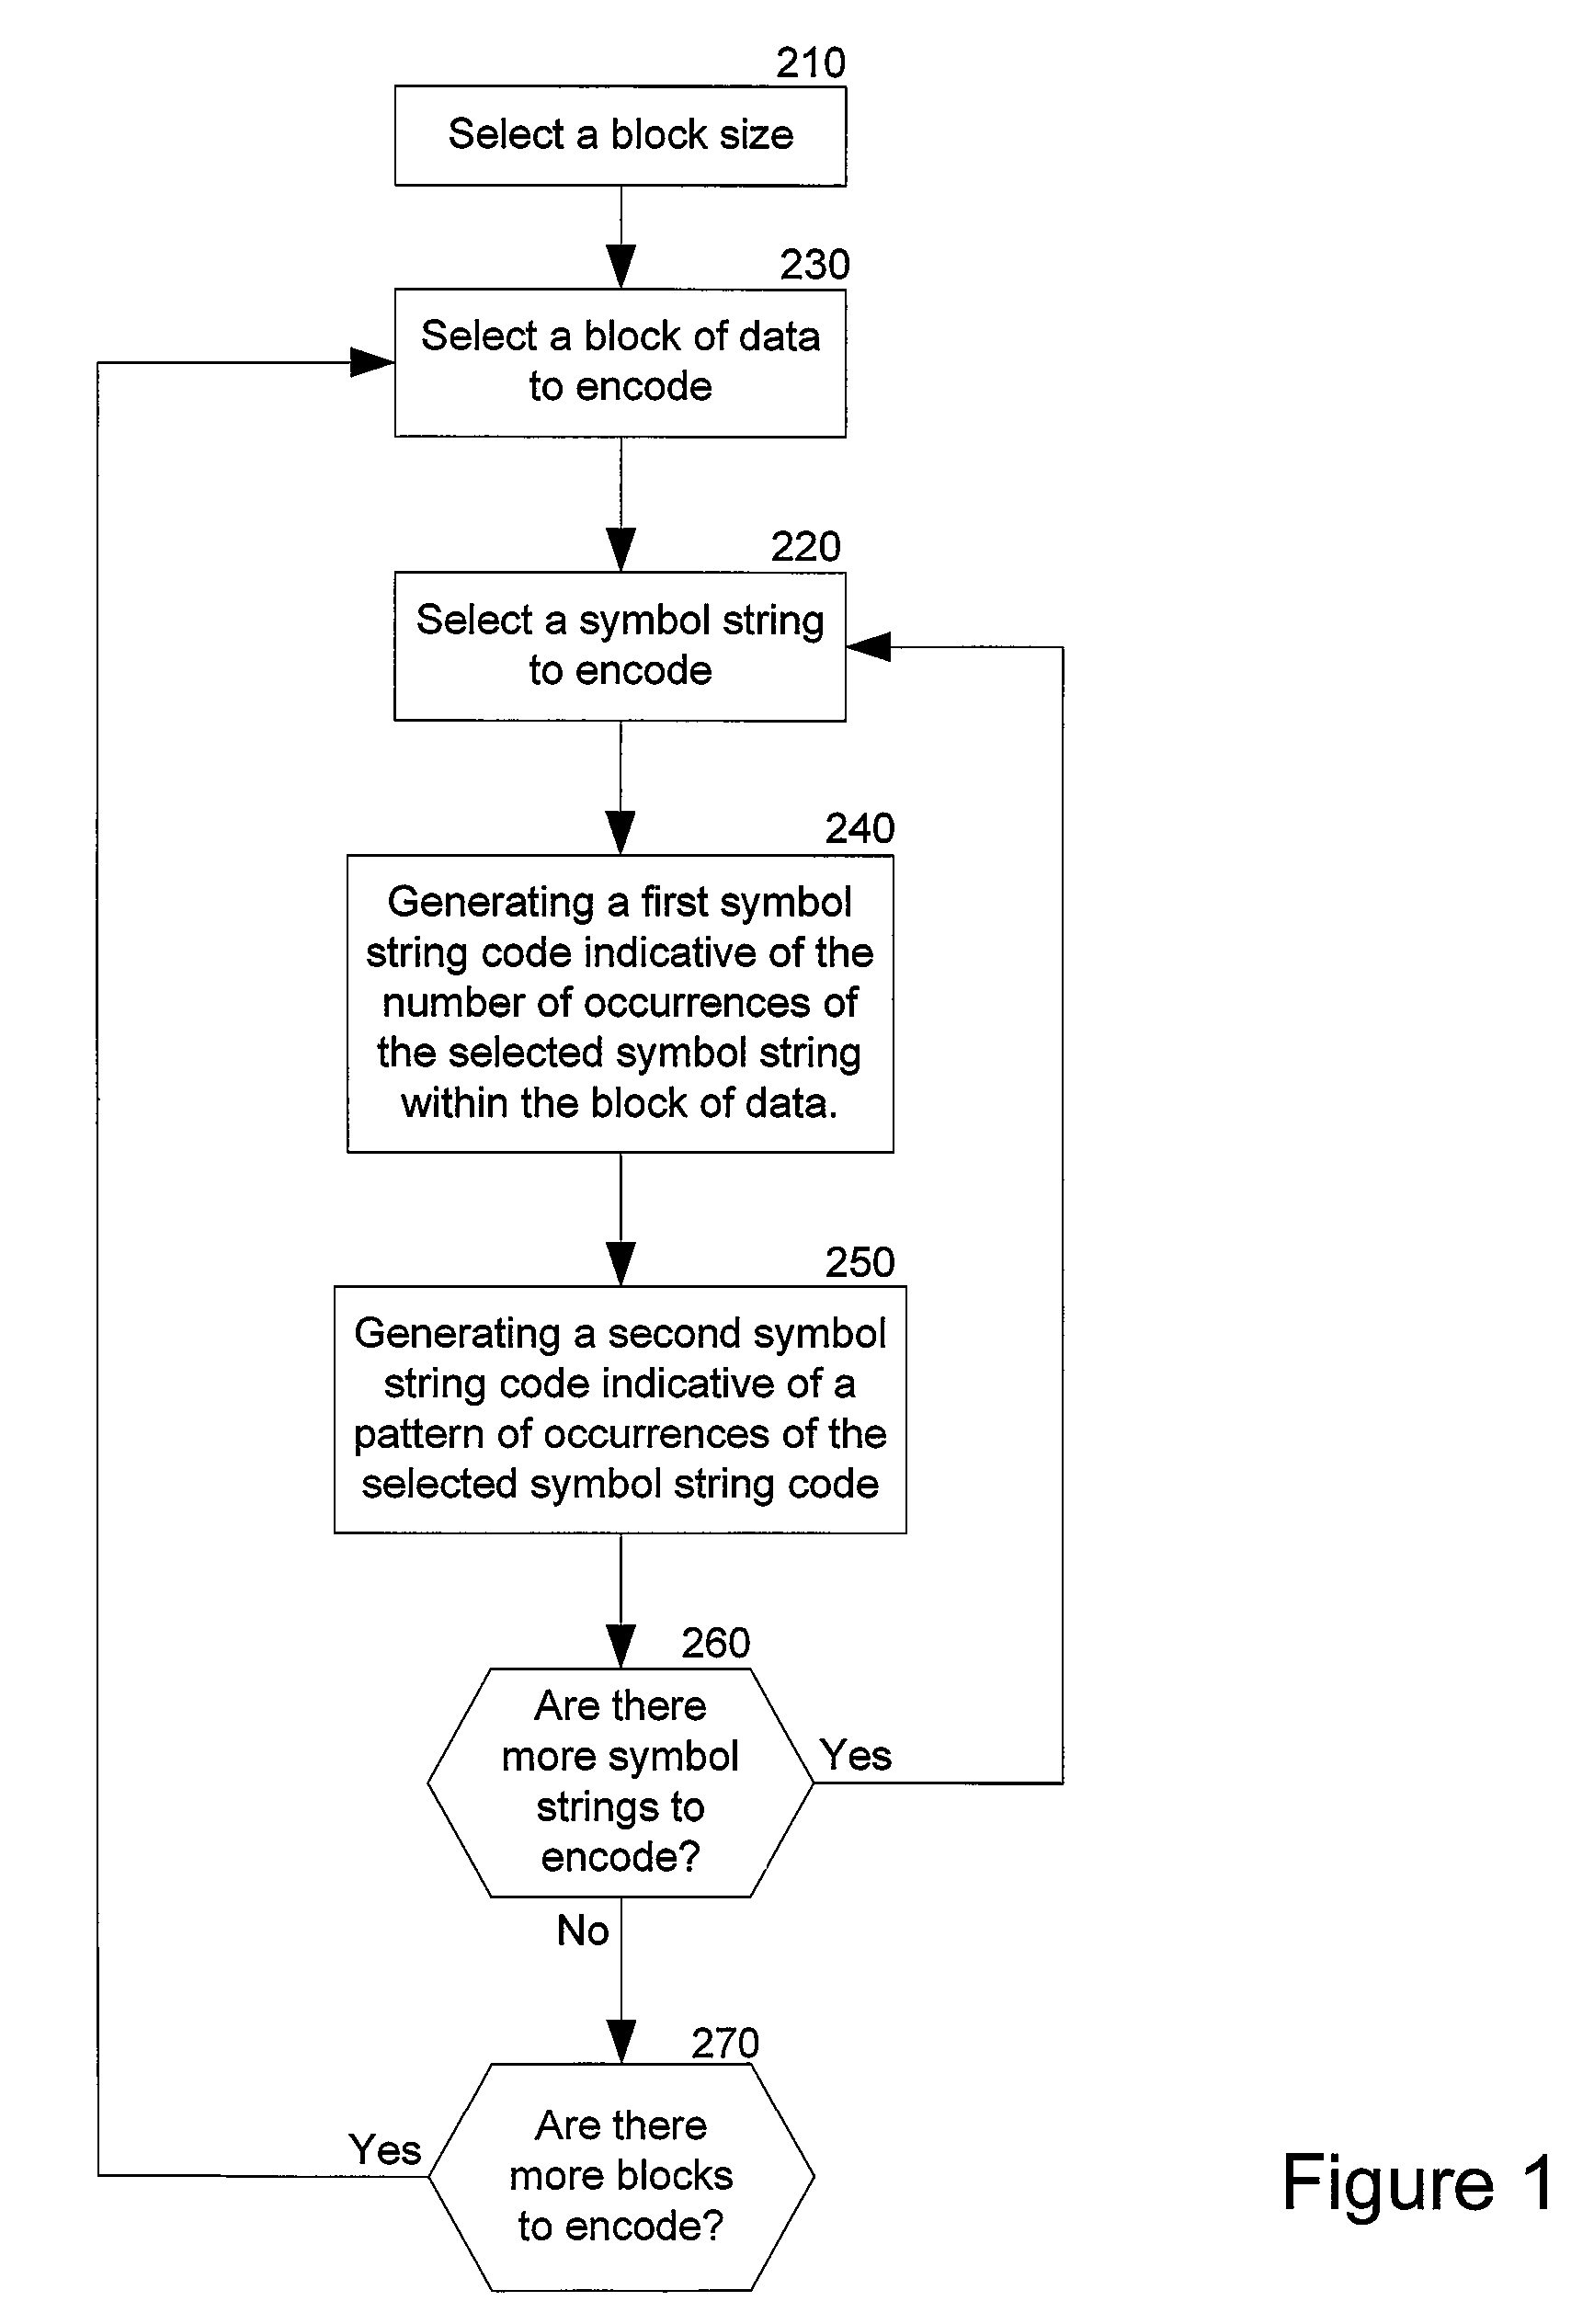 Combinatorial coding/decoding for electrical computers and digital data processing systems